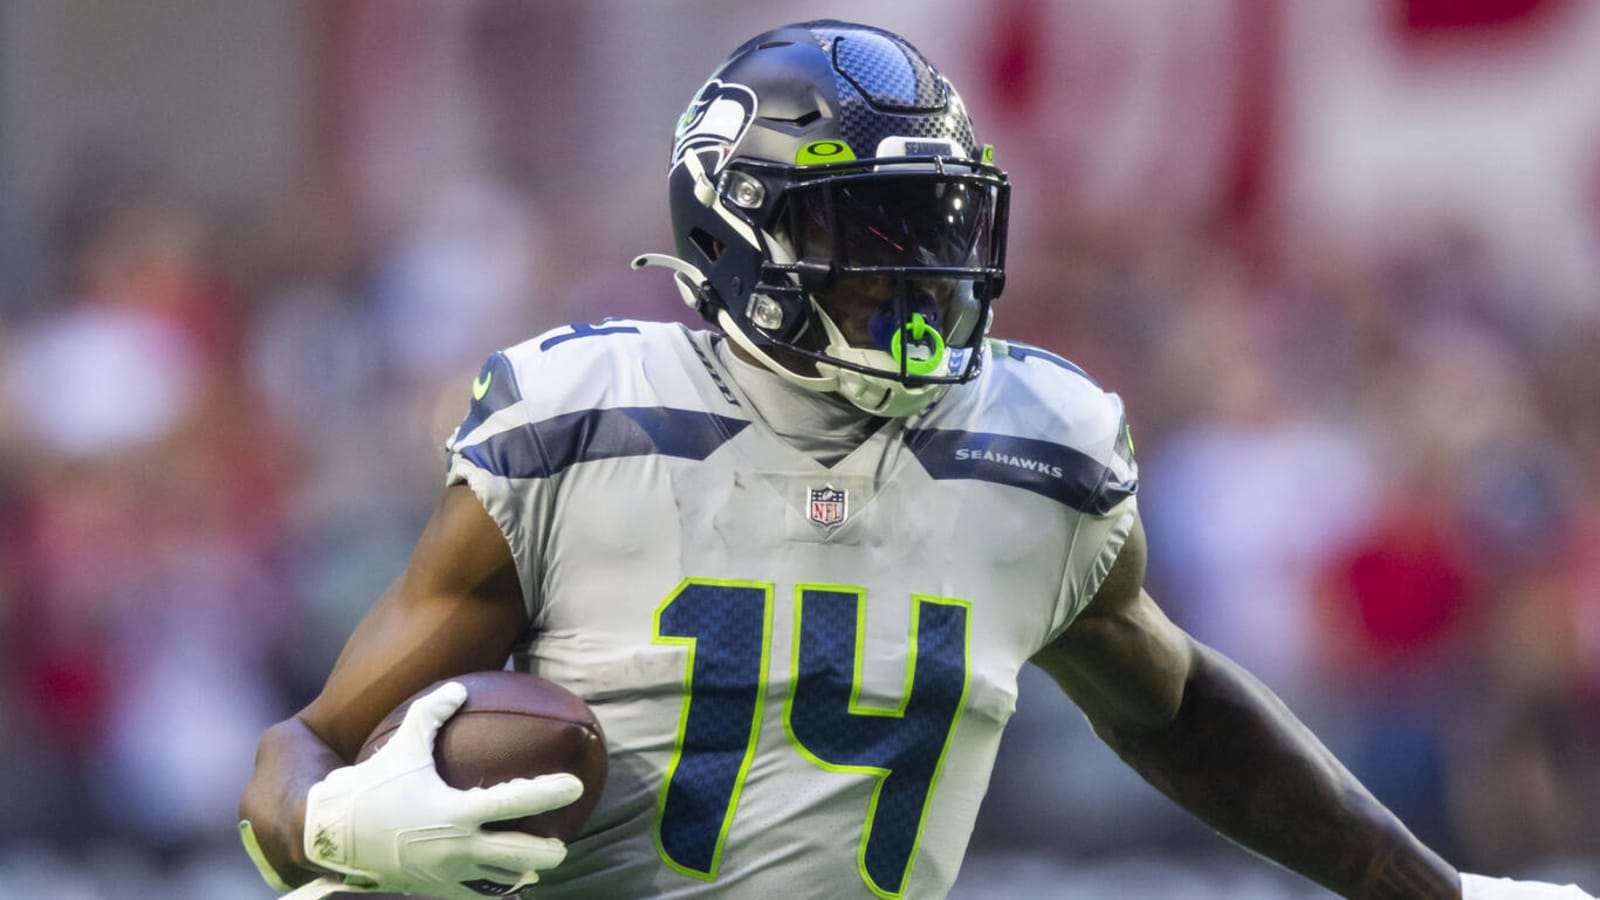 Report: Seahawks to aggressively pursue extension with DK Metcalf